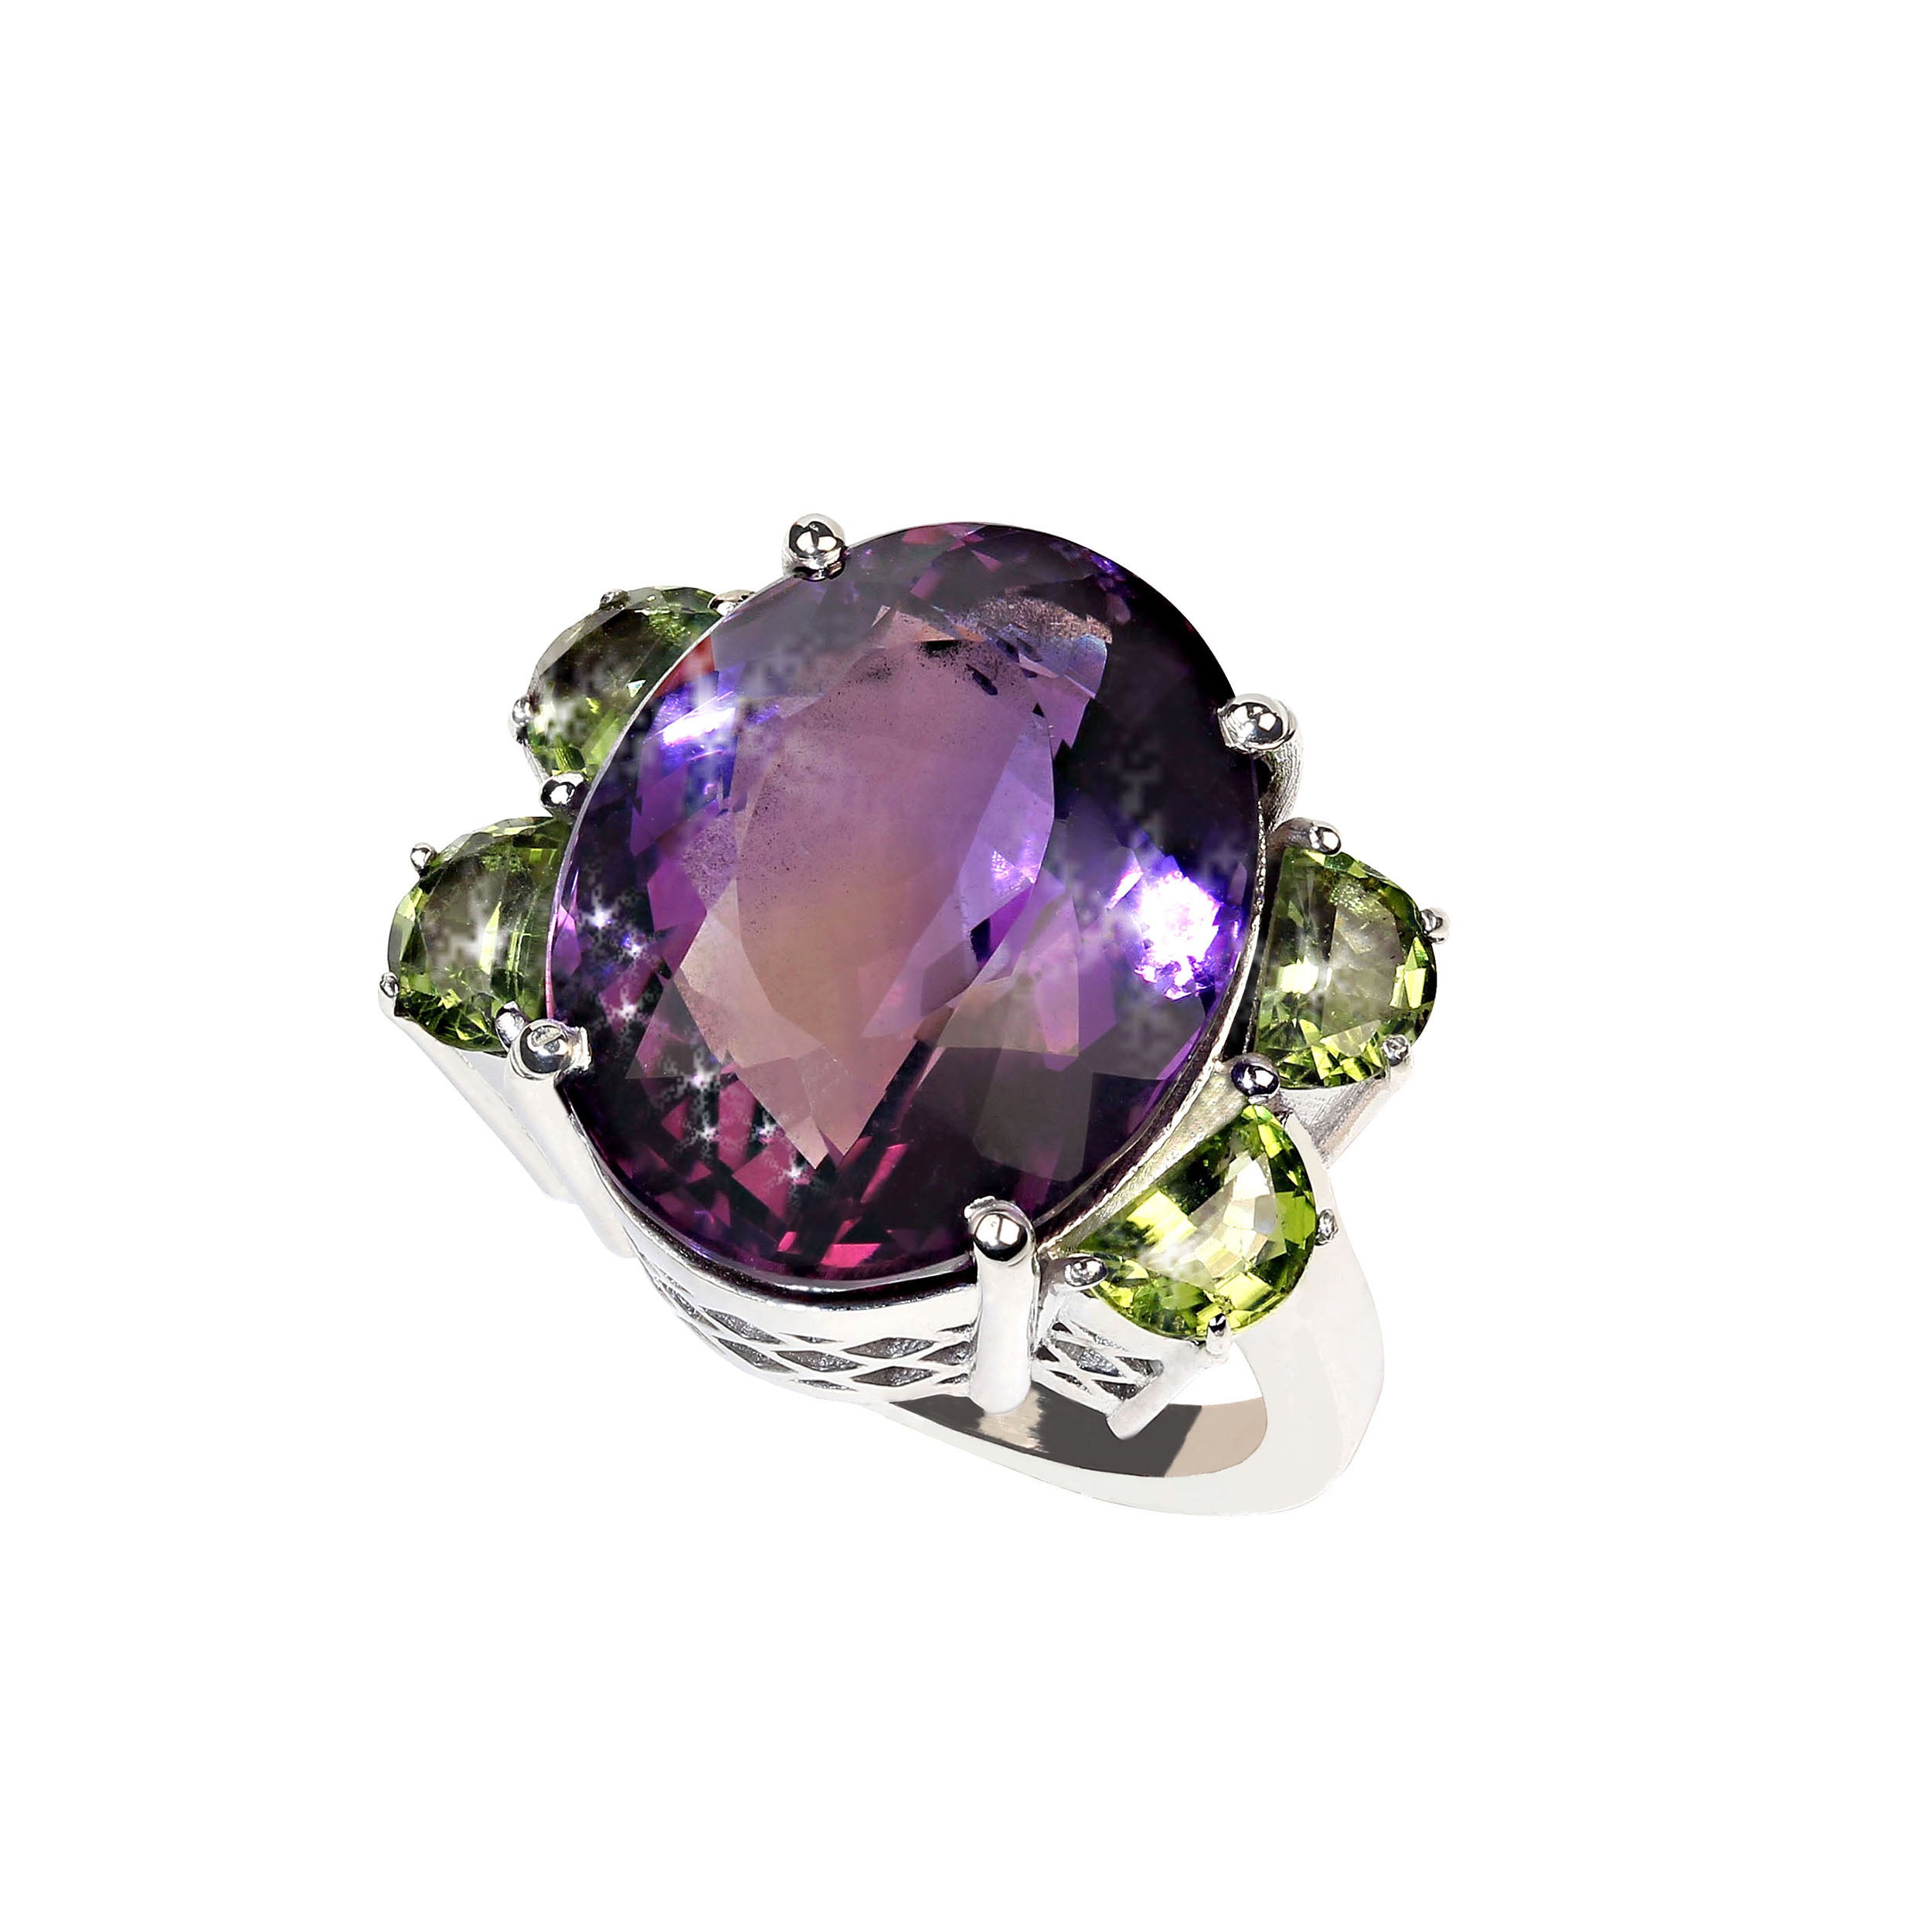 Awesomely elegant dinner ring of Amethyst and Peridot. This sizable 8 ring is a sparkling 20.58 carat oval Amethyst and four perfect Peridot to accent it, 2.06cwt. These gorgeous gemstones are in a custom Sterling Silver setting. Amethyst is the